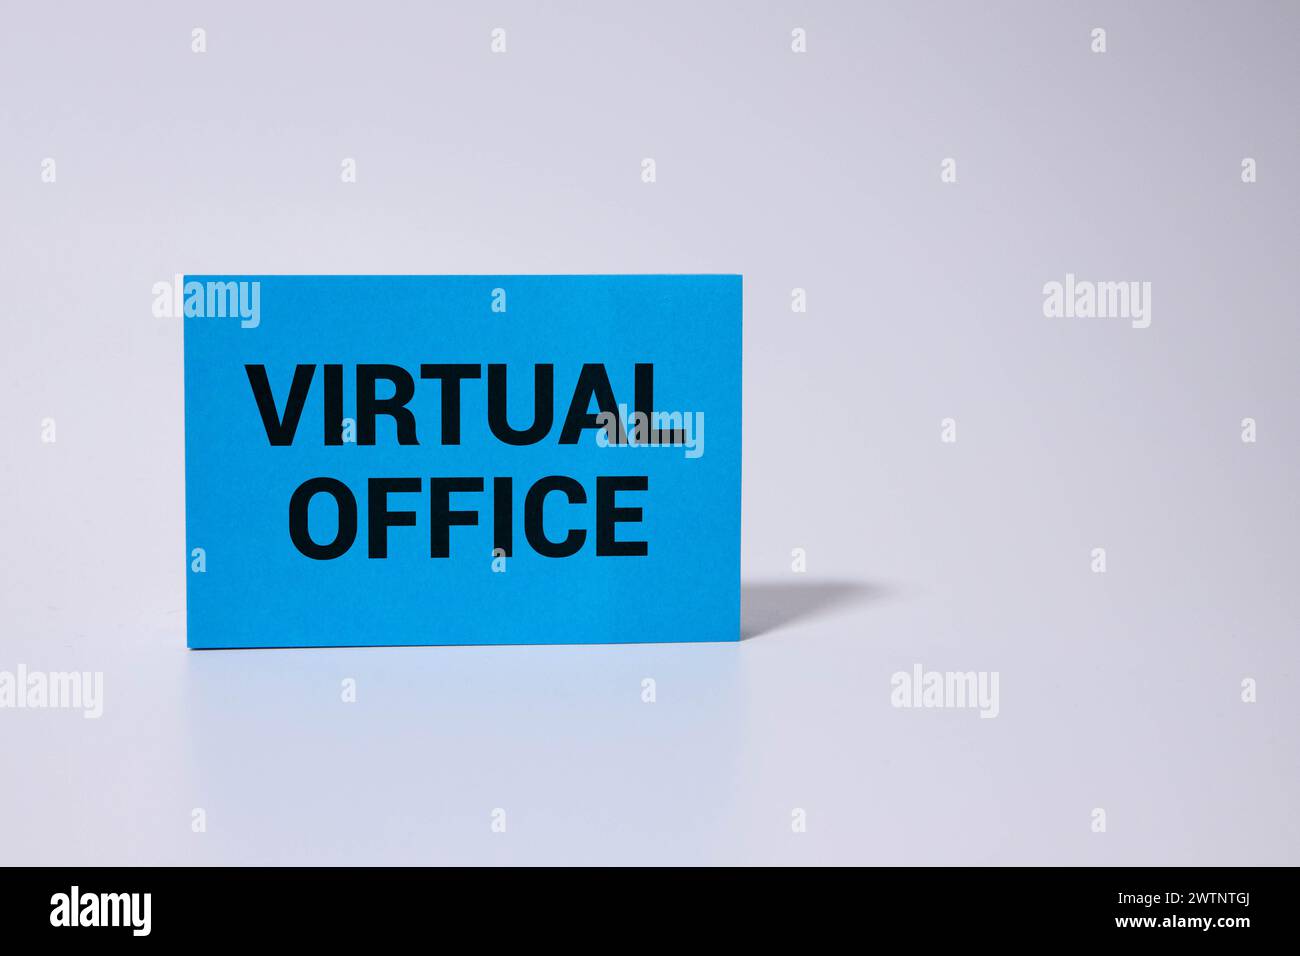 VIRTUAL OFFICE. view from above. work desk with text on a notebook Stock Photo